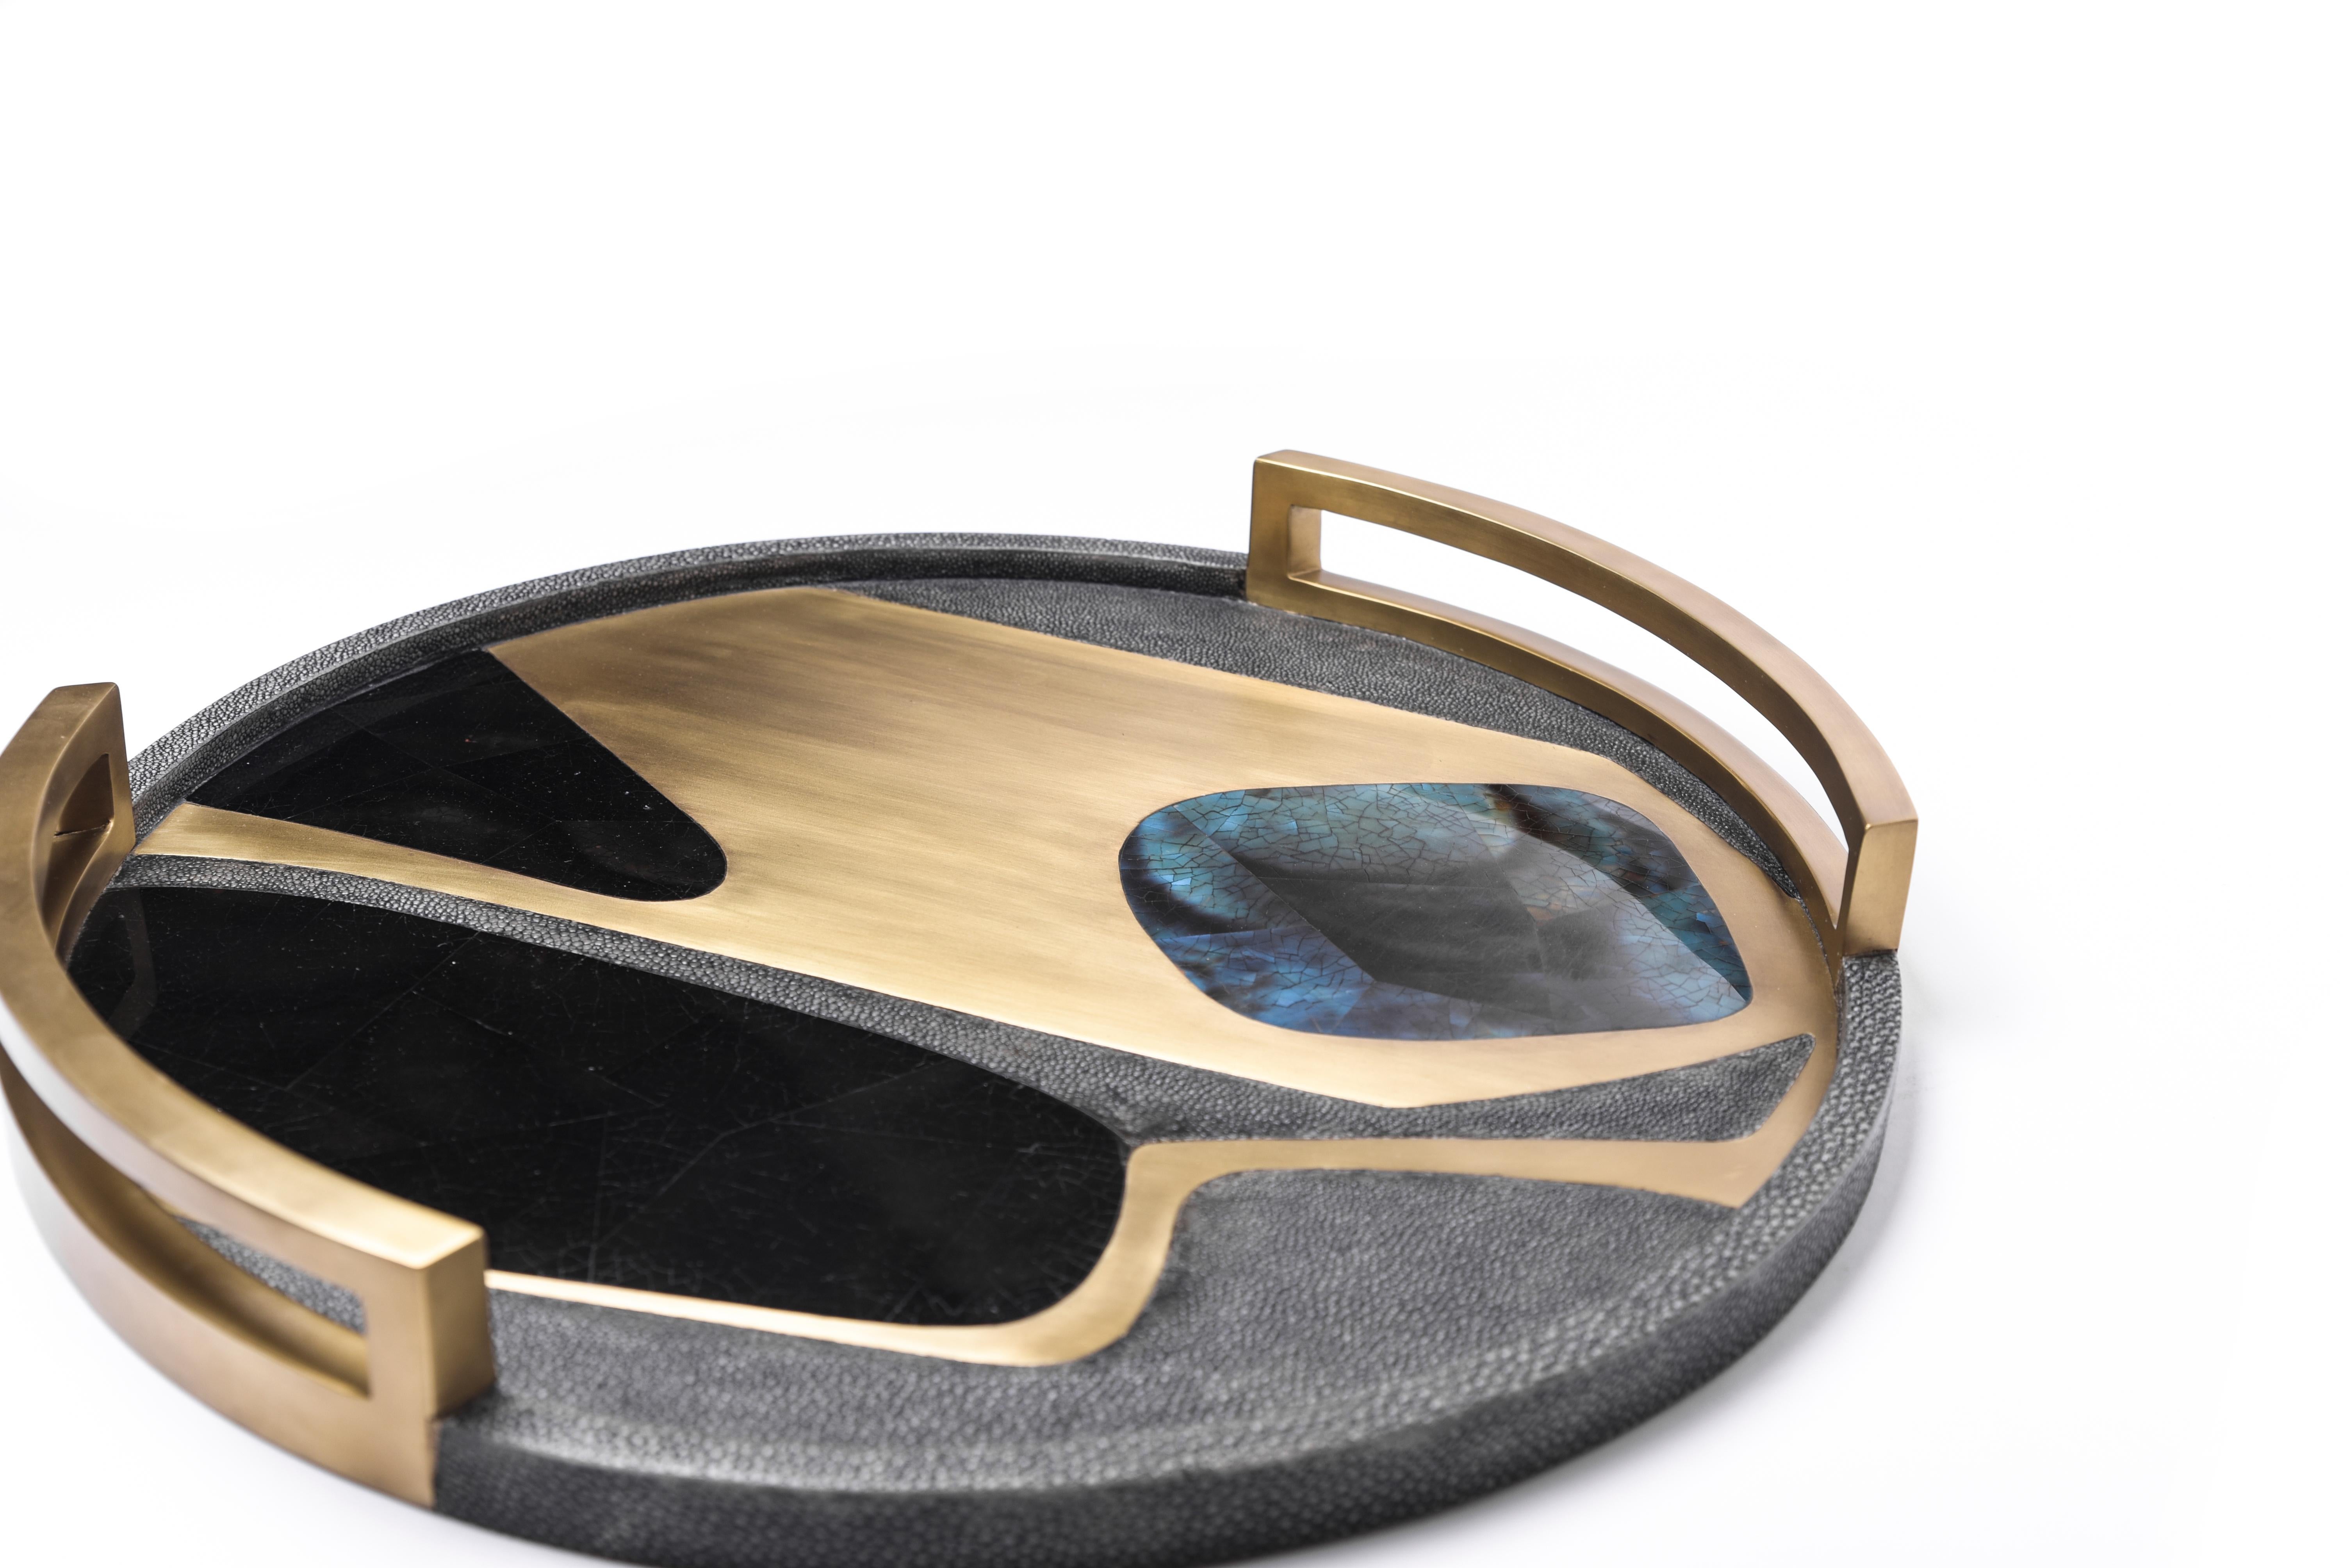 The Cosmos Circular Tray is a stunning tabletop piece for any space. Available in light or dark color way inlaid in a mixture of shagreen, pen shell and bronze-patina brass.

· 48.5 dia x 6.3 cm 

All R & Y Augousti pieces are handmade by